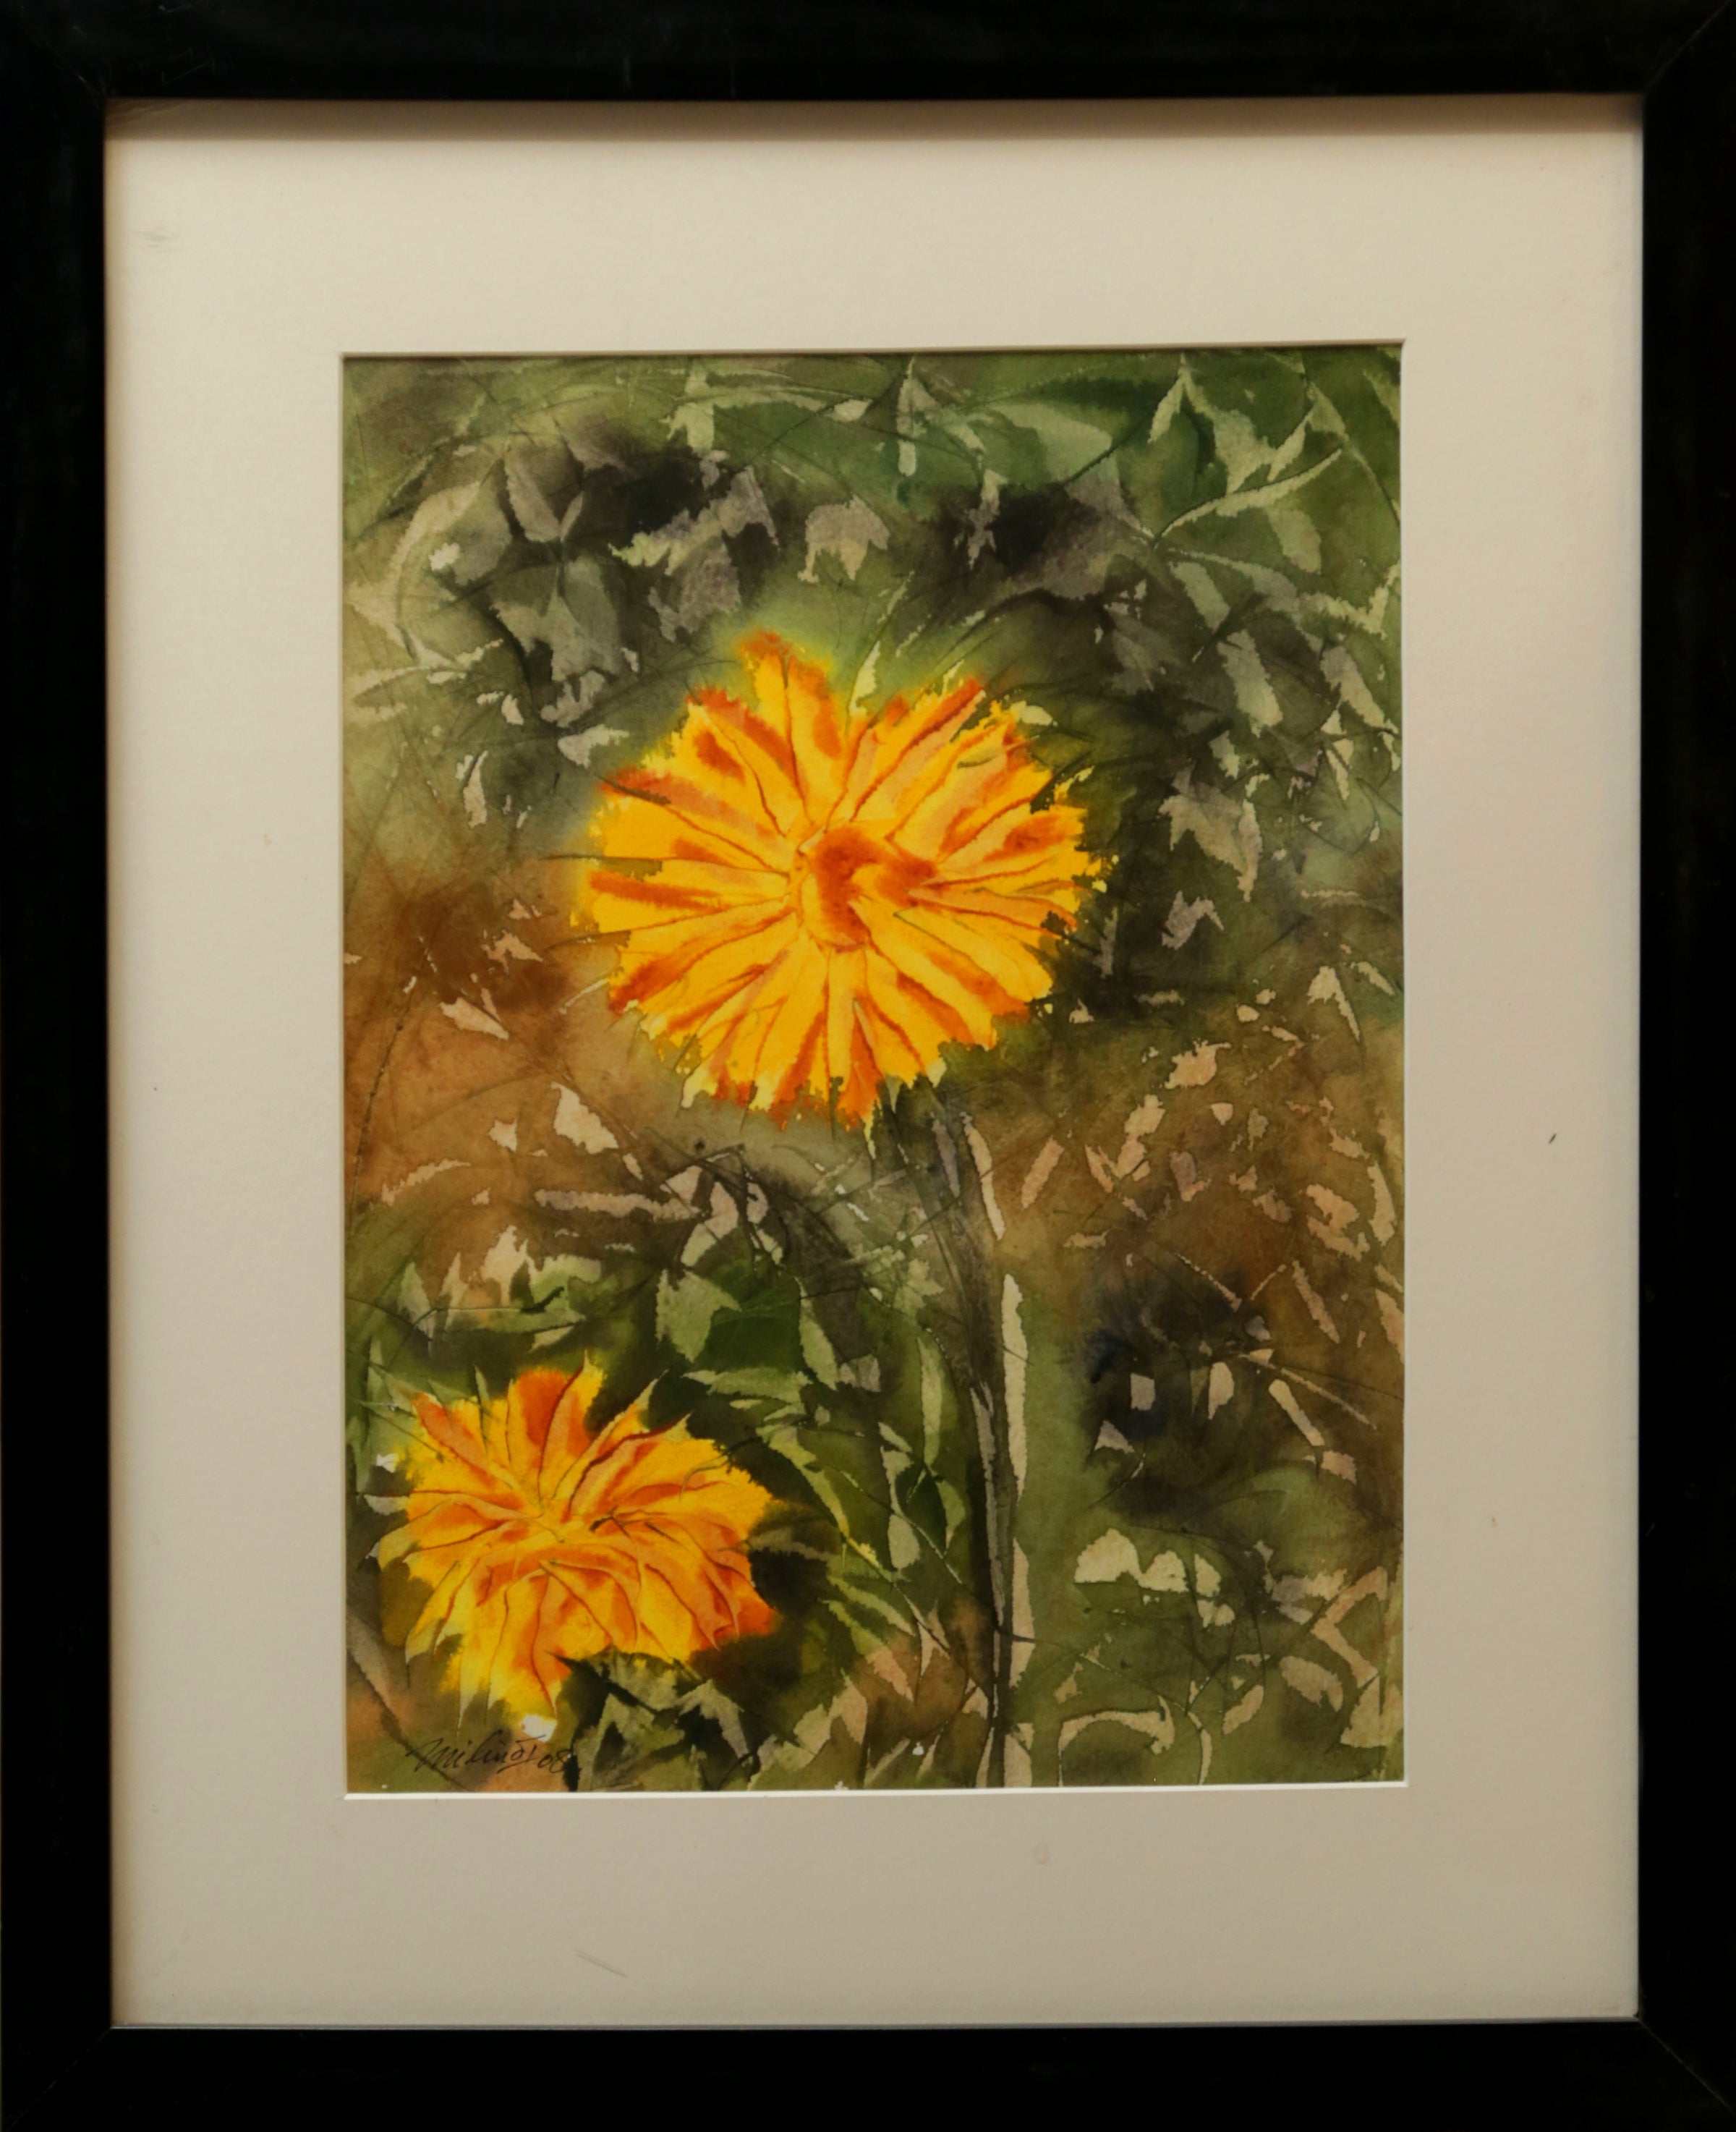 YELLOW FLOWERS by Milind Nayak | Water colour art on paper - Home Decor